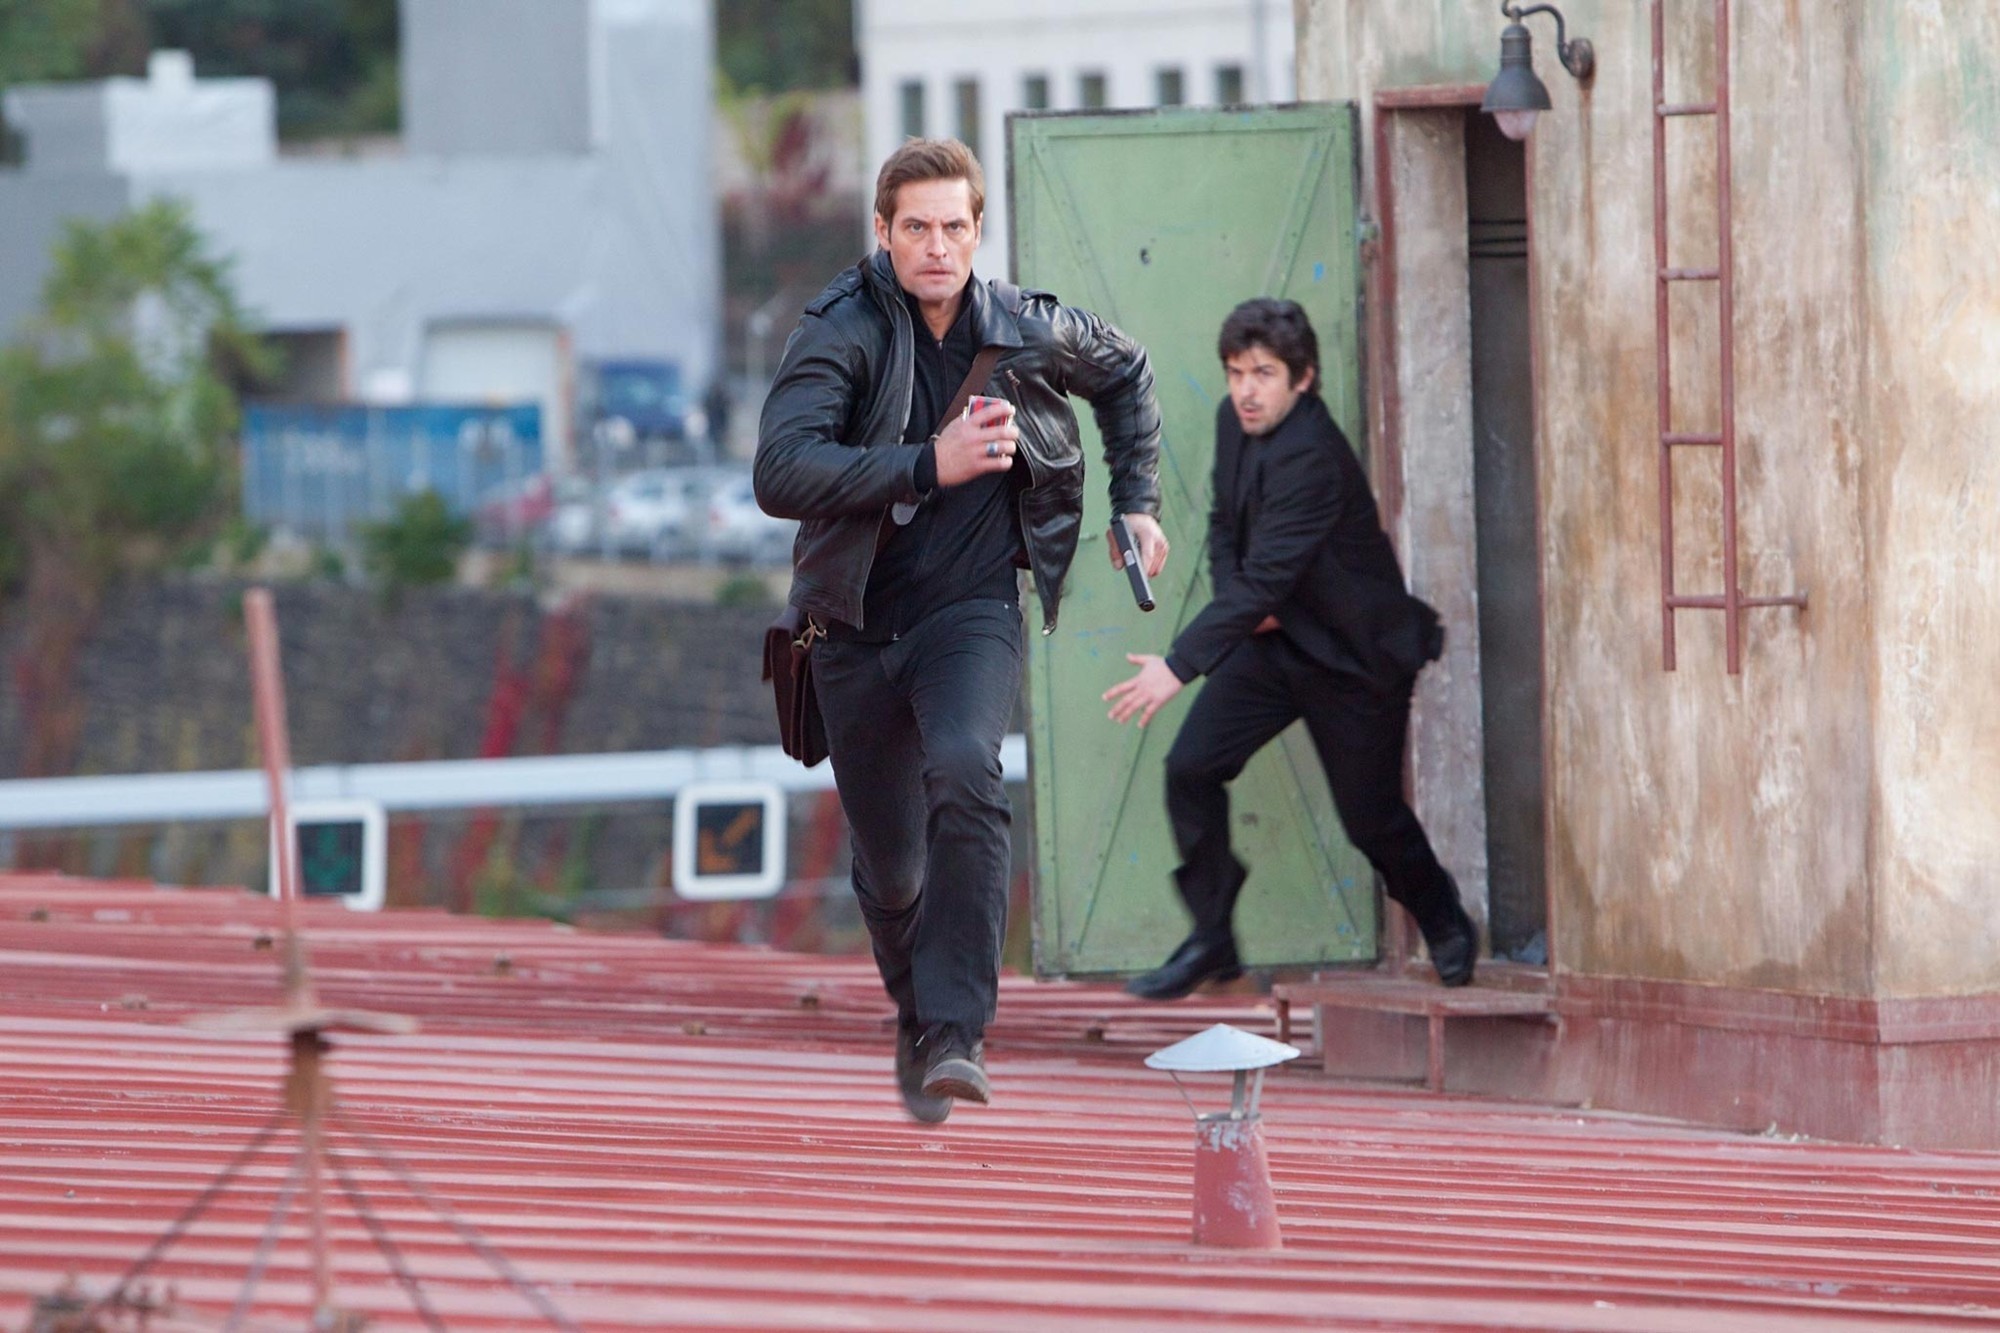 A scene from Paramount Pictures' Mission: Impossible Ghost Protocol (2011)